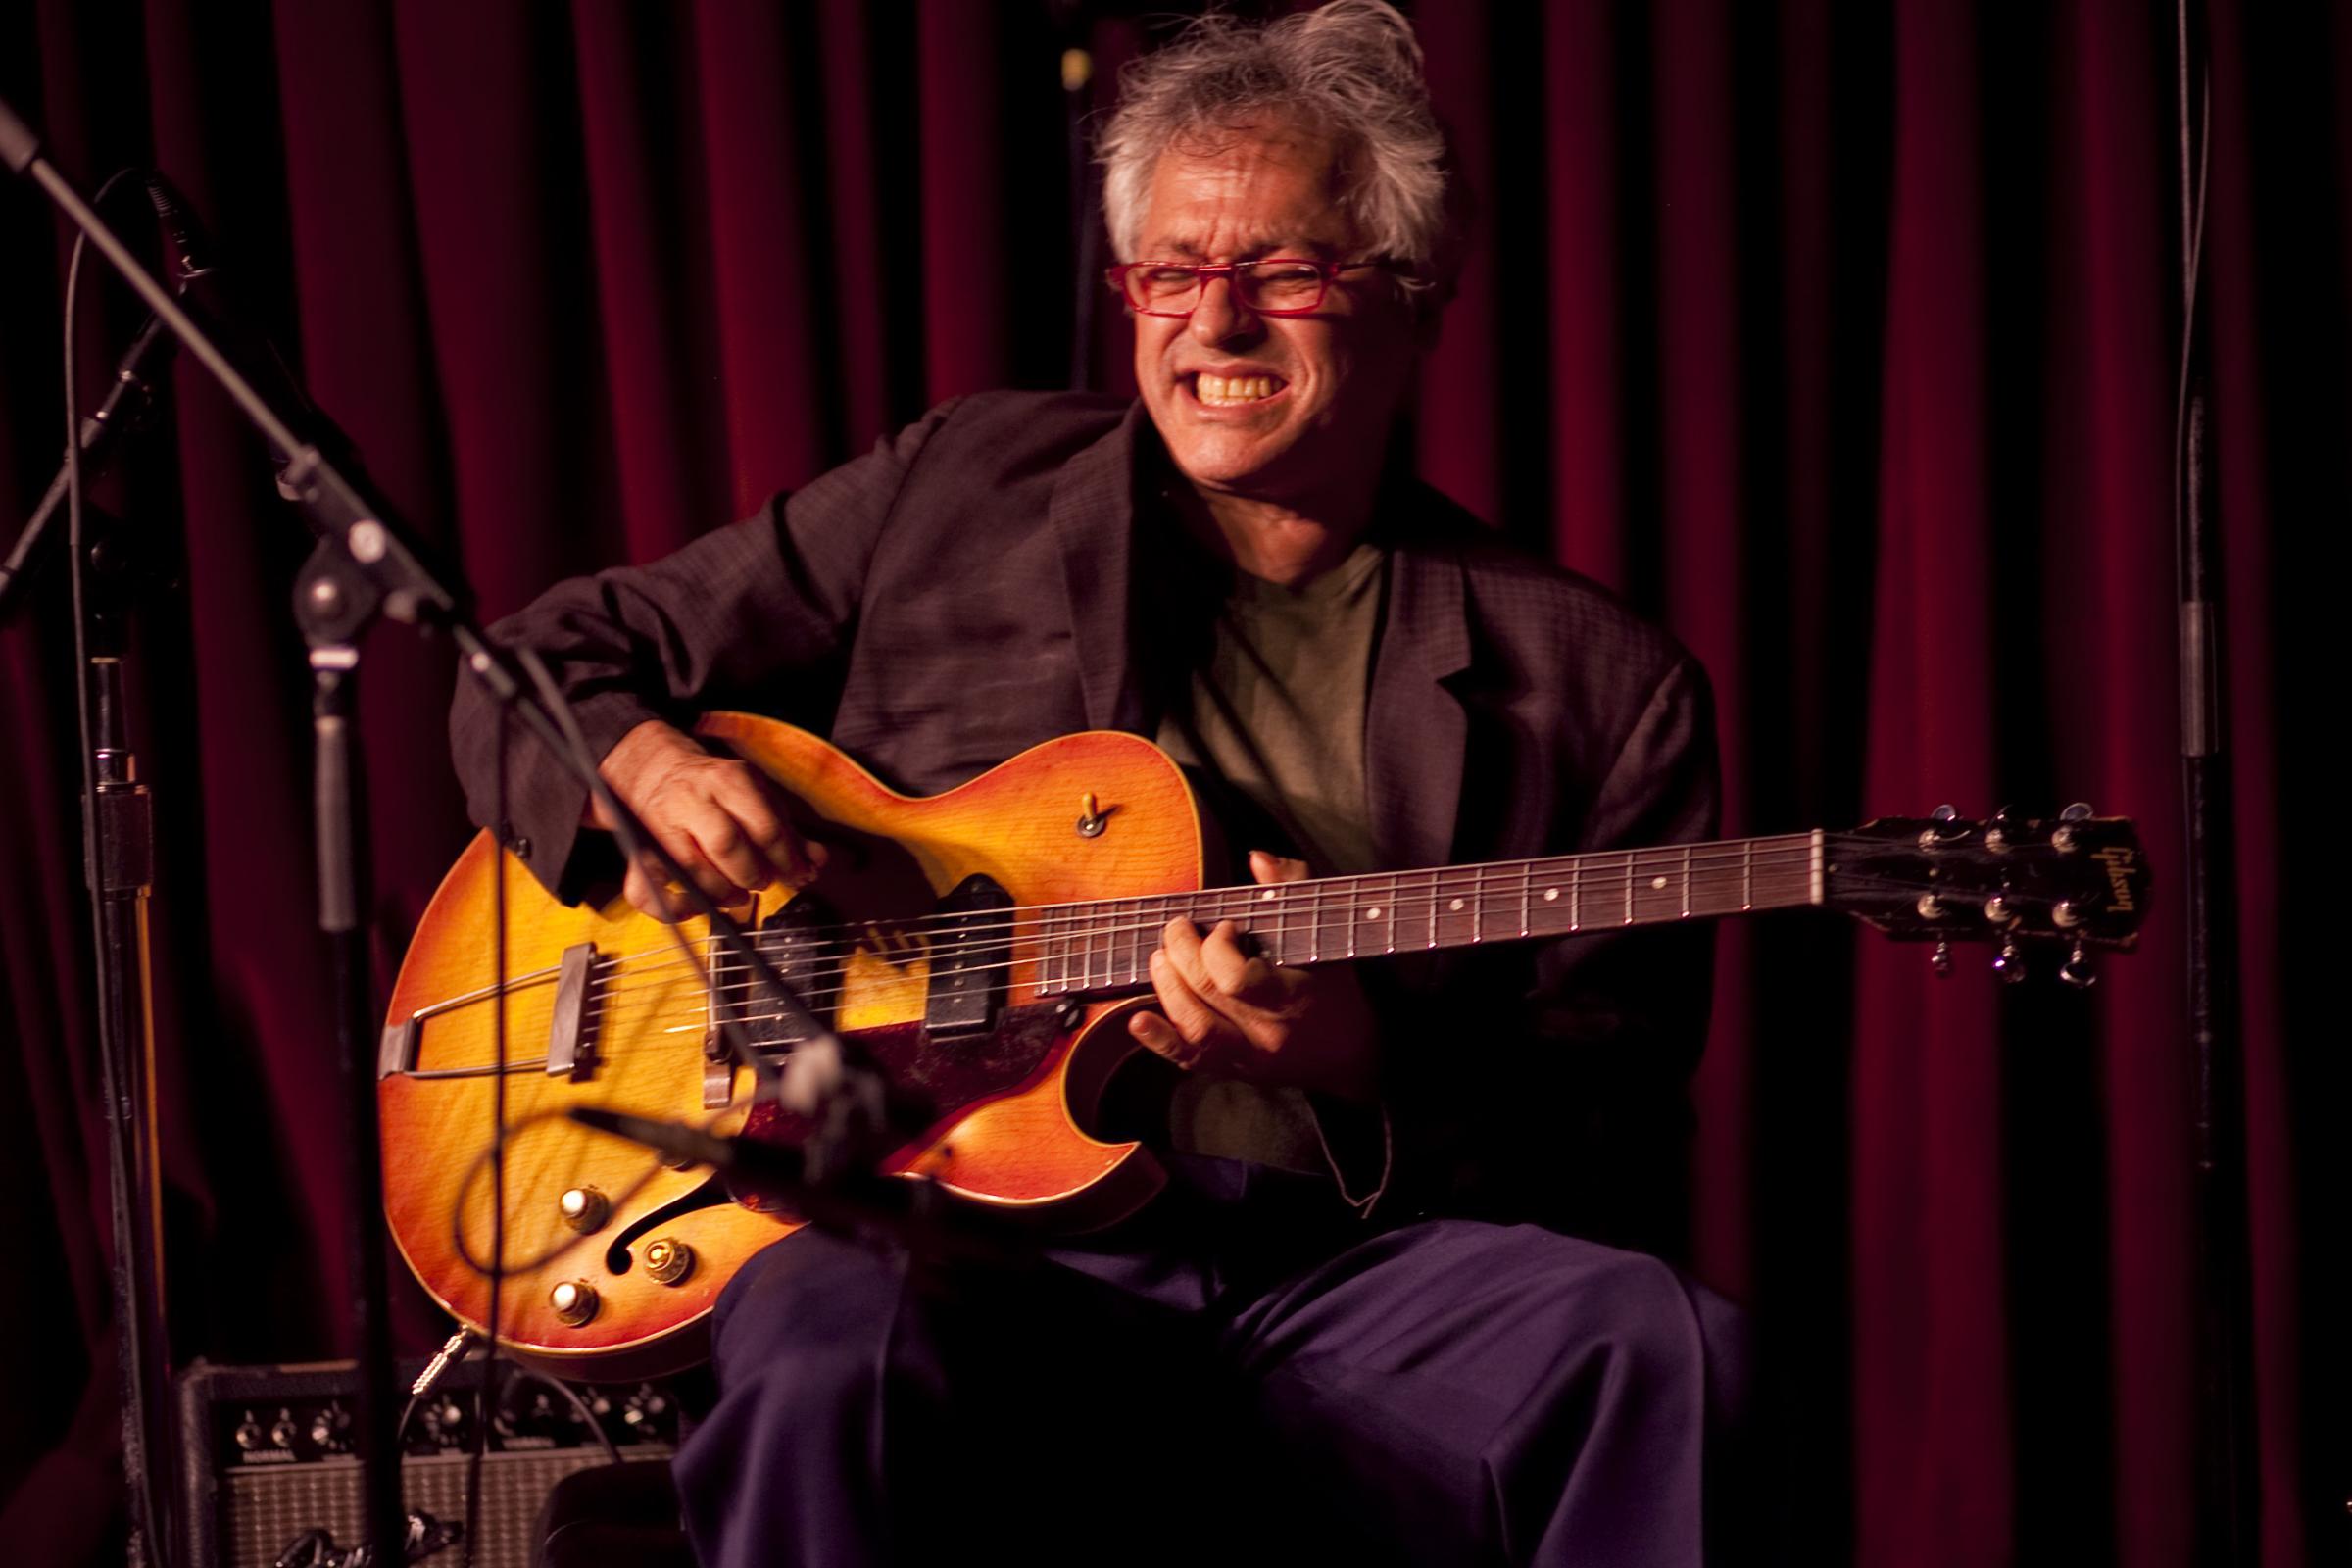 Marc Ribot will perform in solo concert & lead an improvisation workshop at Marylhurst University May 8-9, 2015